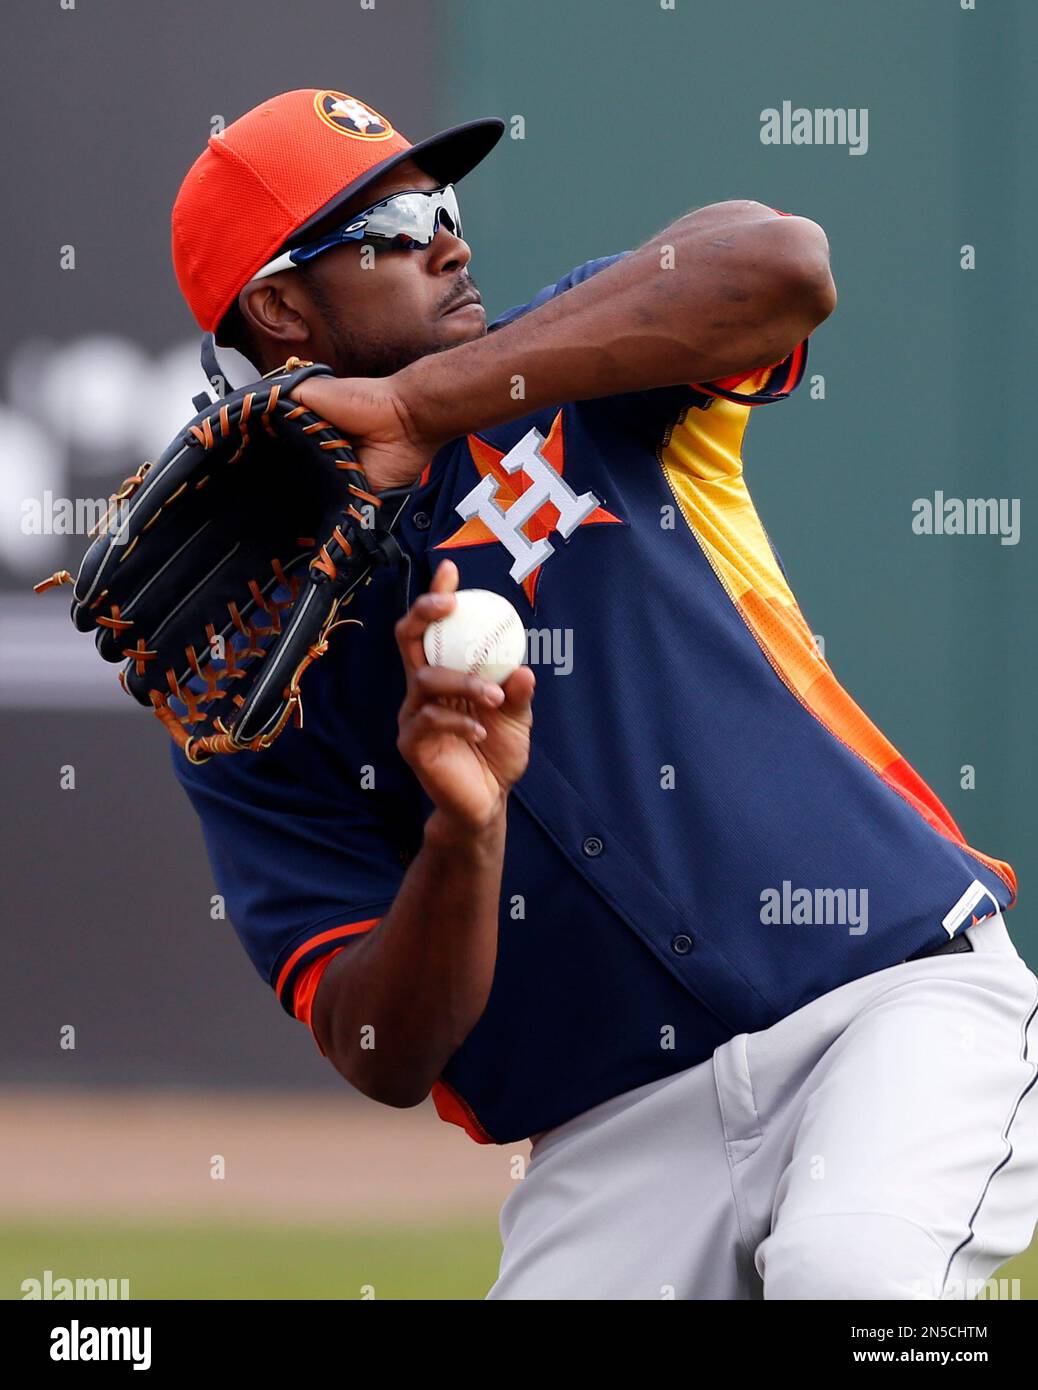 Houston Astros outfielder L.J. Hoes (28) during a spring training game  against the Miami Marlins on March 21, 2014 at Osceola County Stadium in  Kissimmee, Florida. Miami defeated Houston 7-2. (Mike Janes/Four